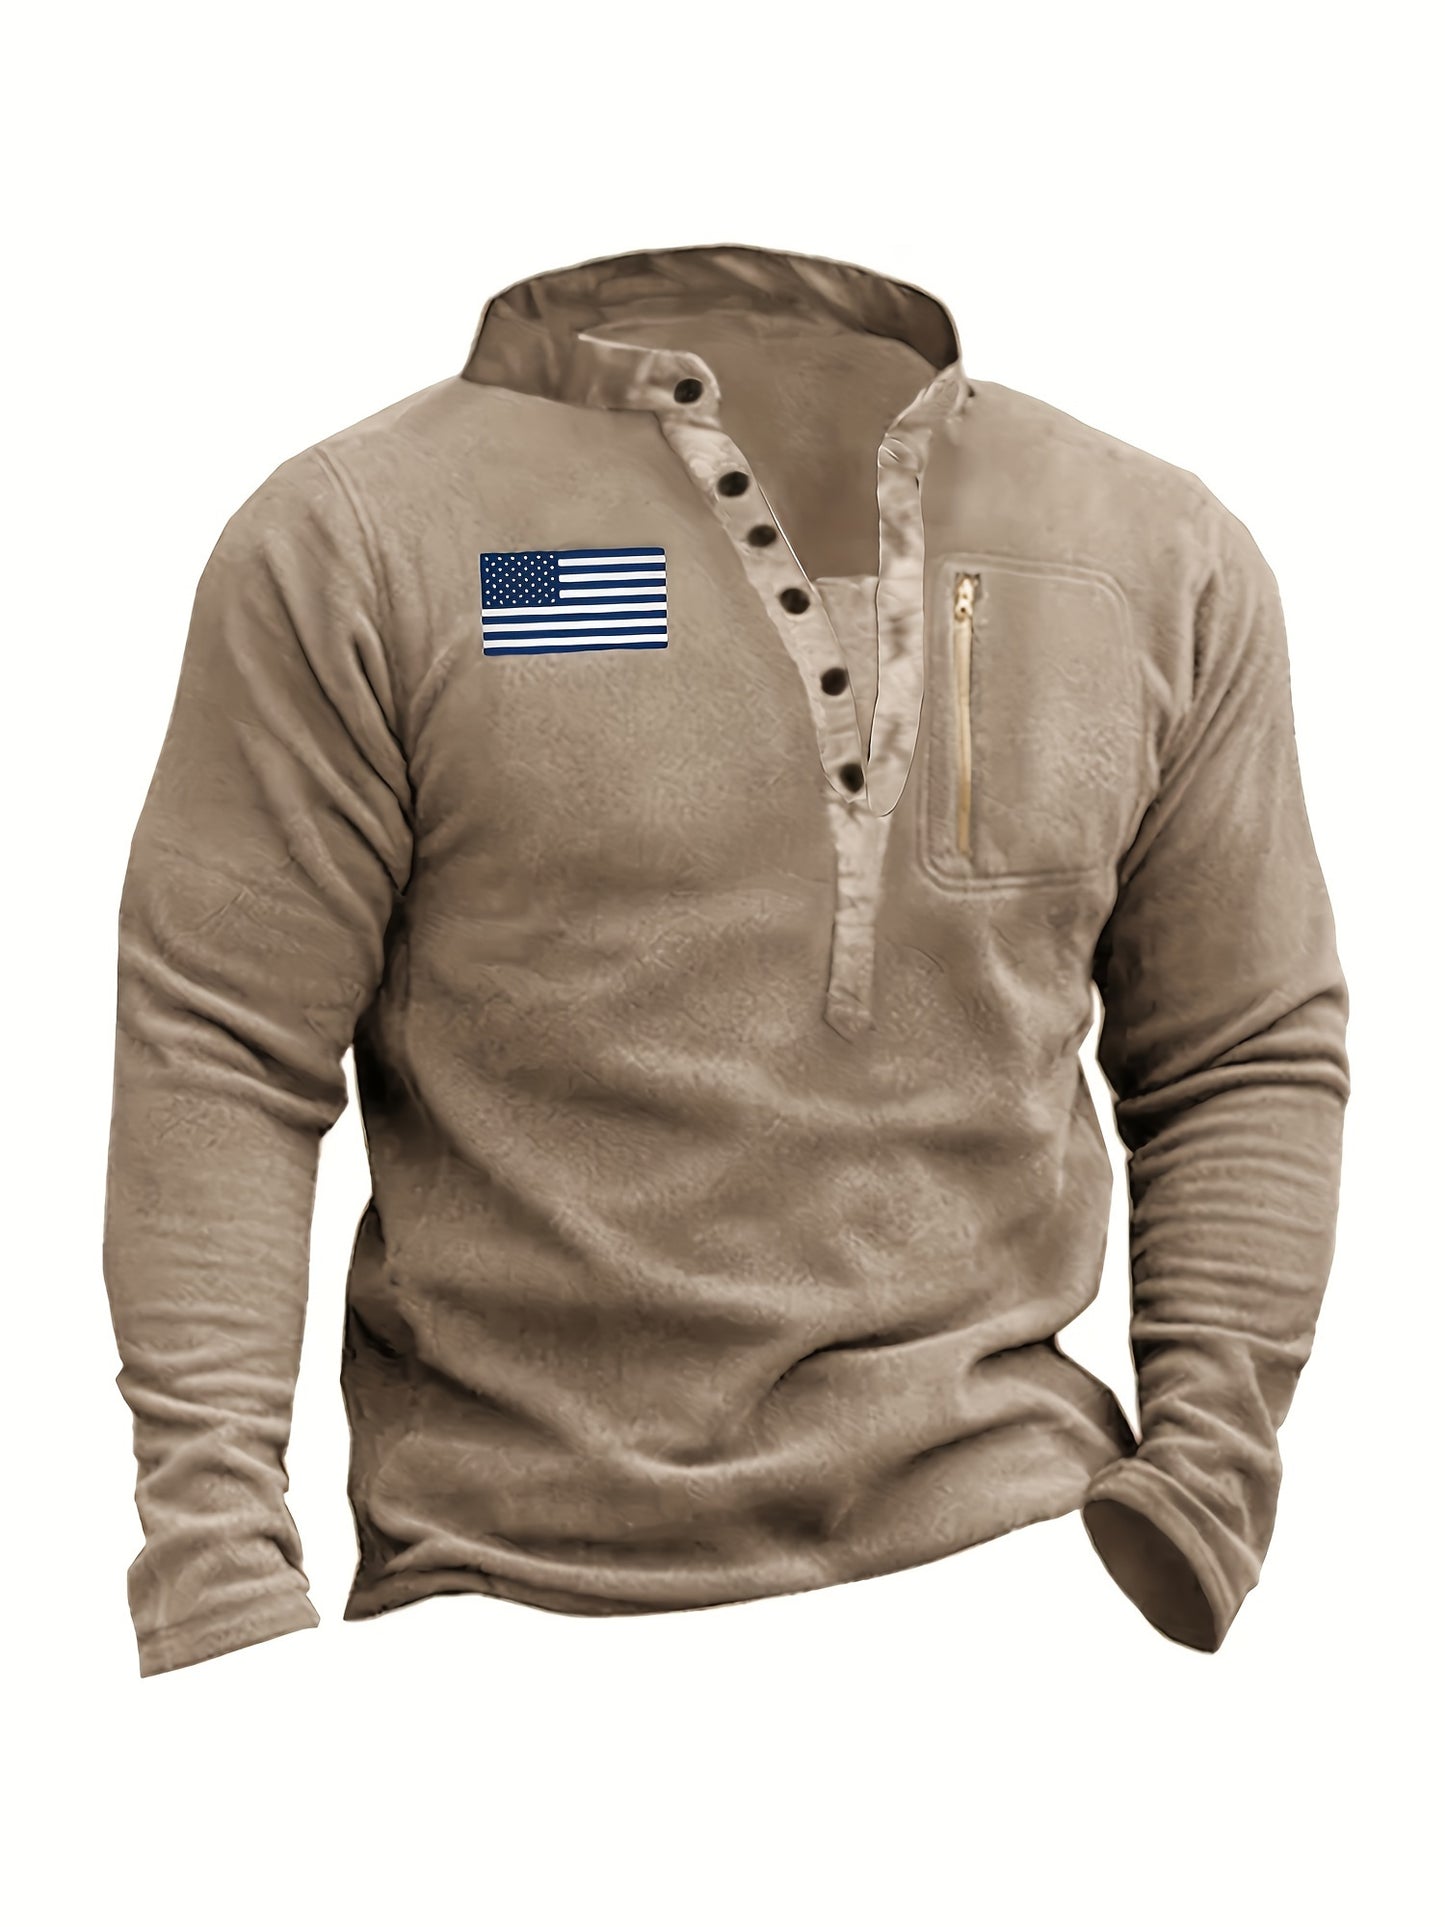 Retro Style Men's Fleece Thick Warm V-neck Clothing With Zipper Pocket For Fall Winter, Gift For Men